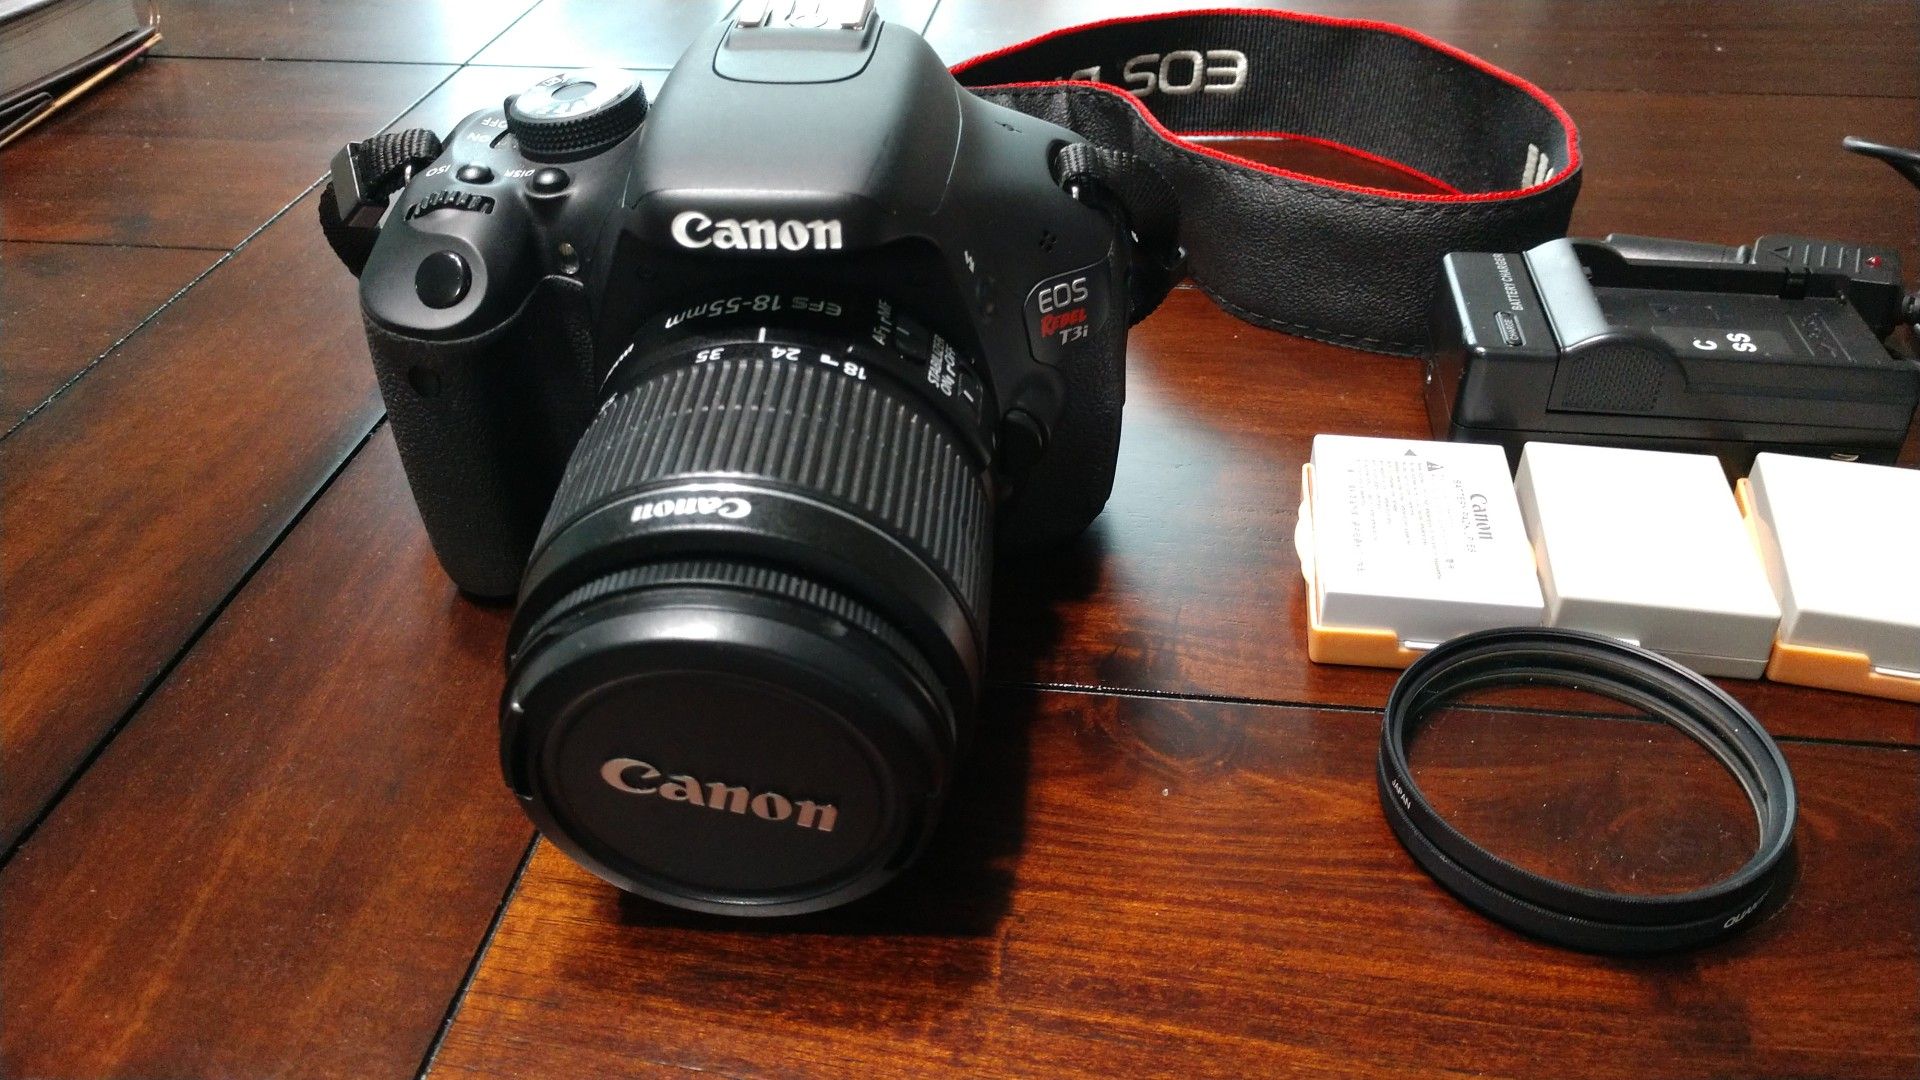 Canon EOS Rebel T3i Digital SLR Camera with EF-S 18-55mm f/3.5-5.6 IS Lens